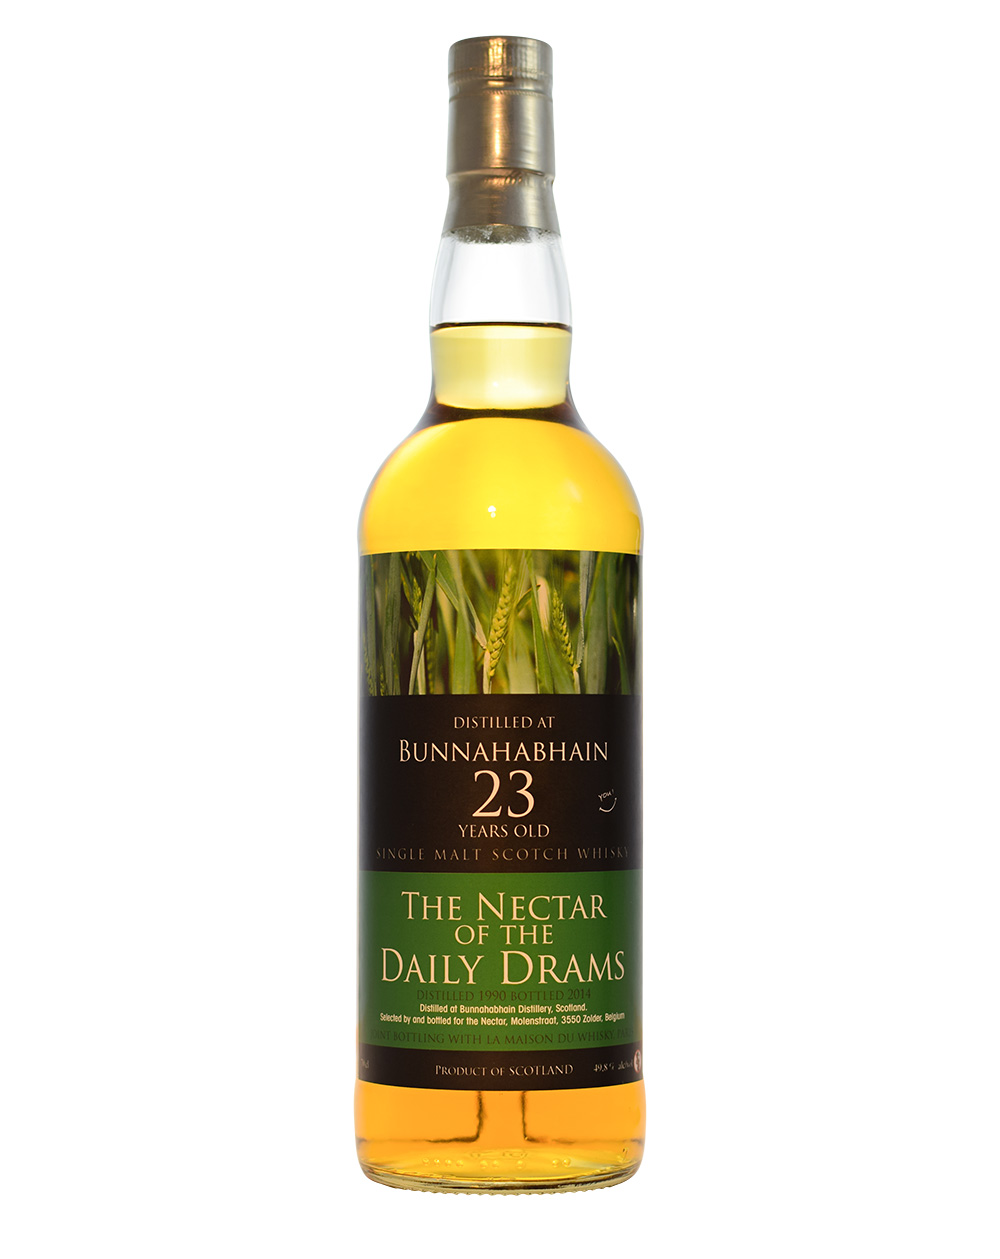 Bunnahabhain 1990 - The Nectar of the Daily Drams (23 Years Old) Musthave Malts MHM